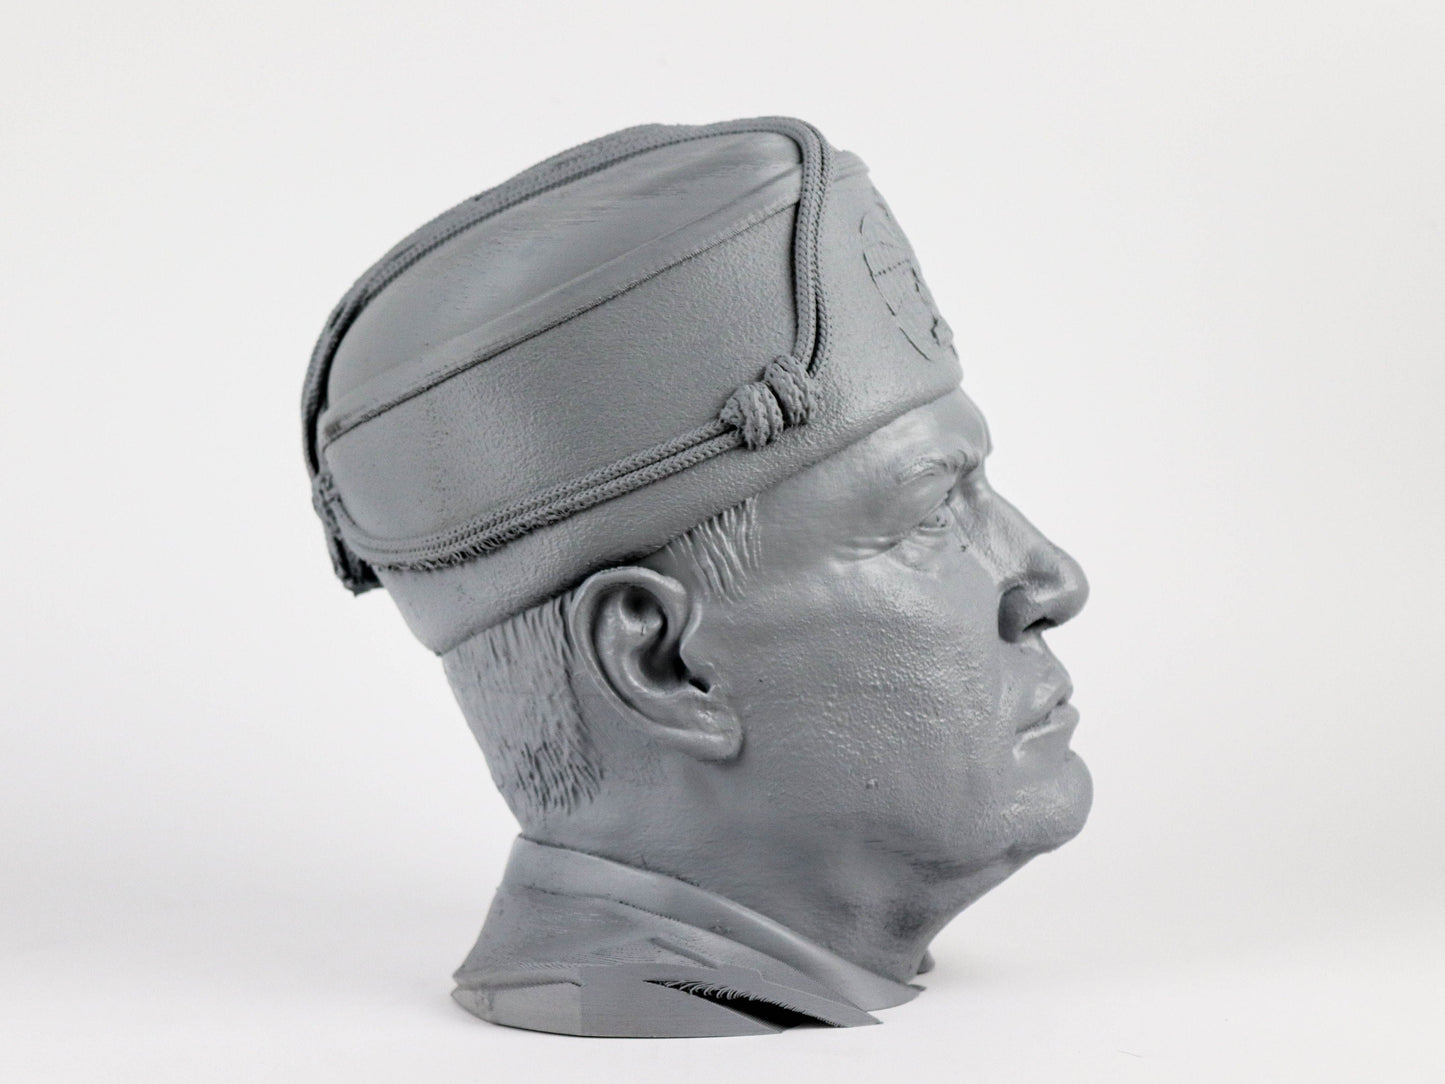 Benito Mussolini Bust, Il Duce Statue, Former Prime Minister of Italy Headphone Decor